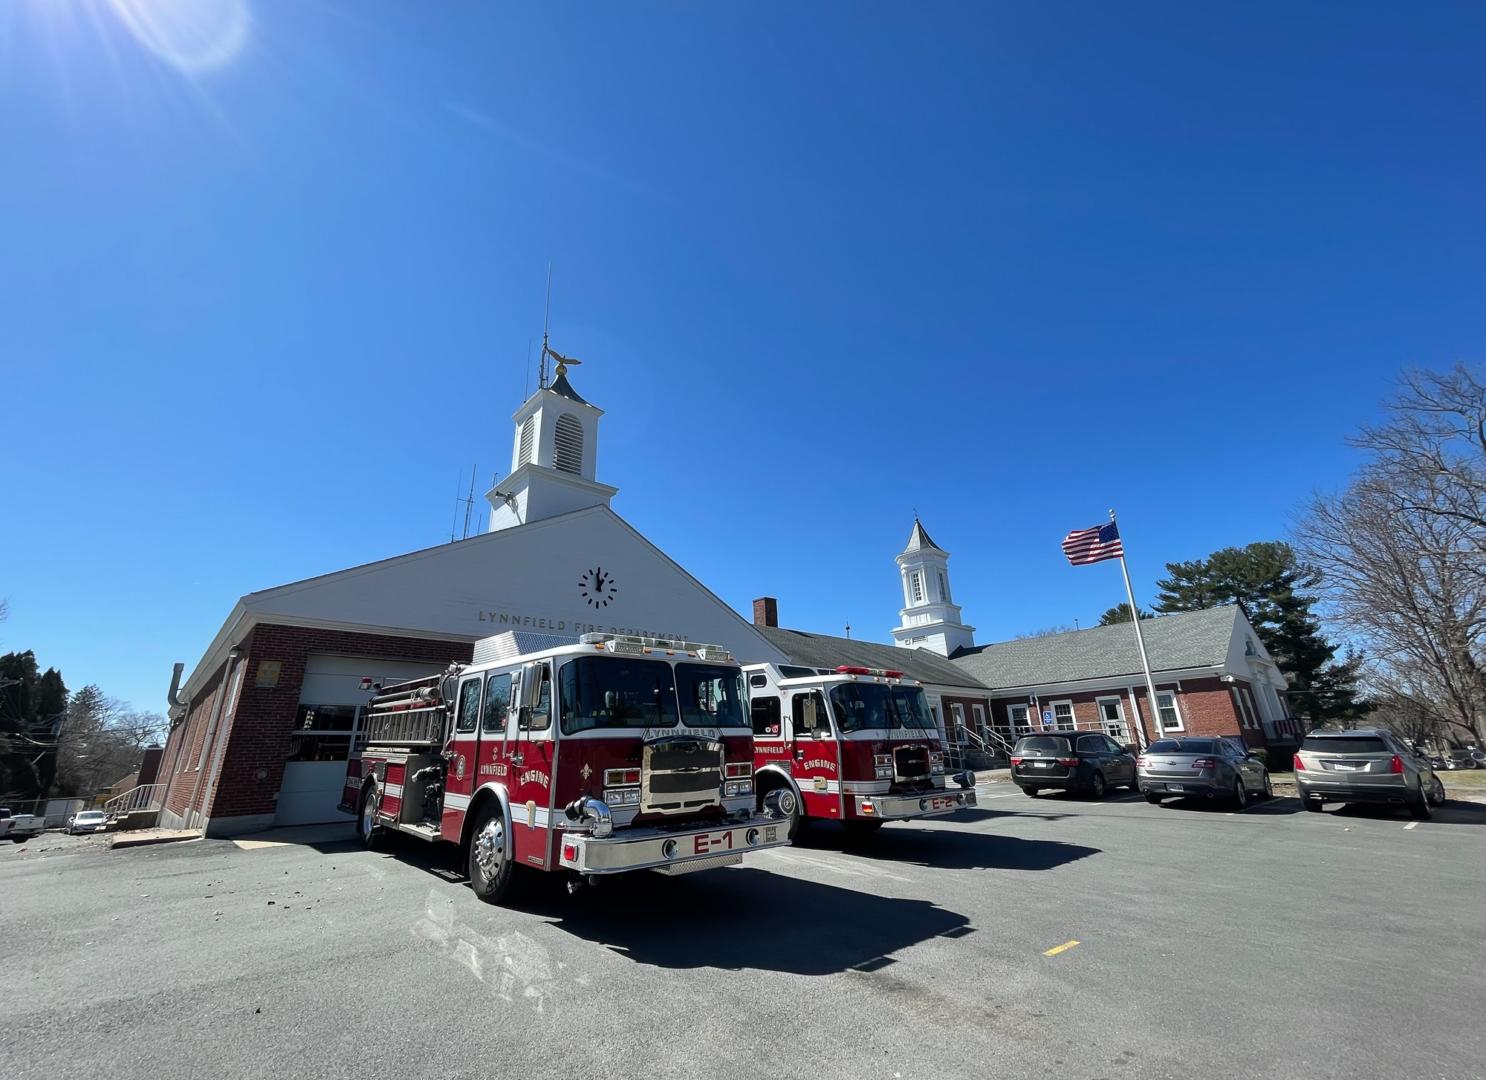 In Case You Missed it: Watch the Public Safety Building Project Update Presented to the Board of Selectmen